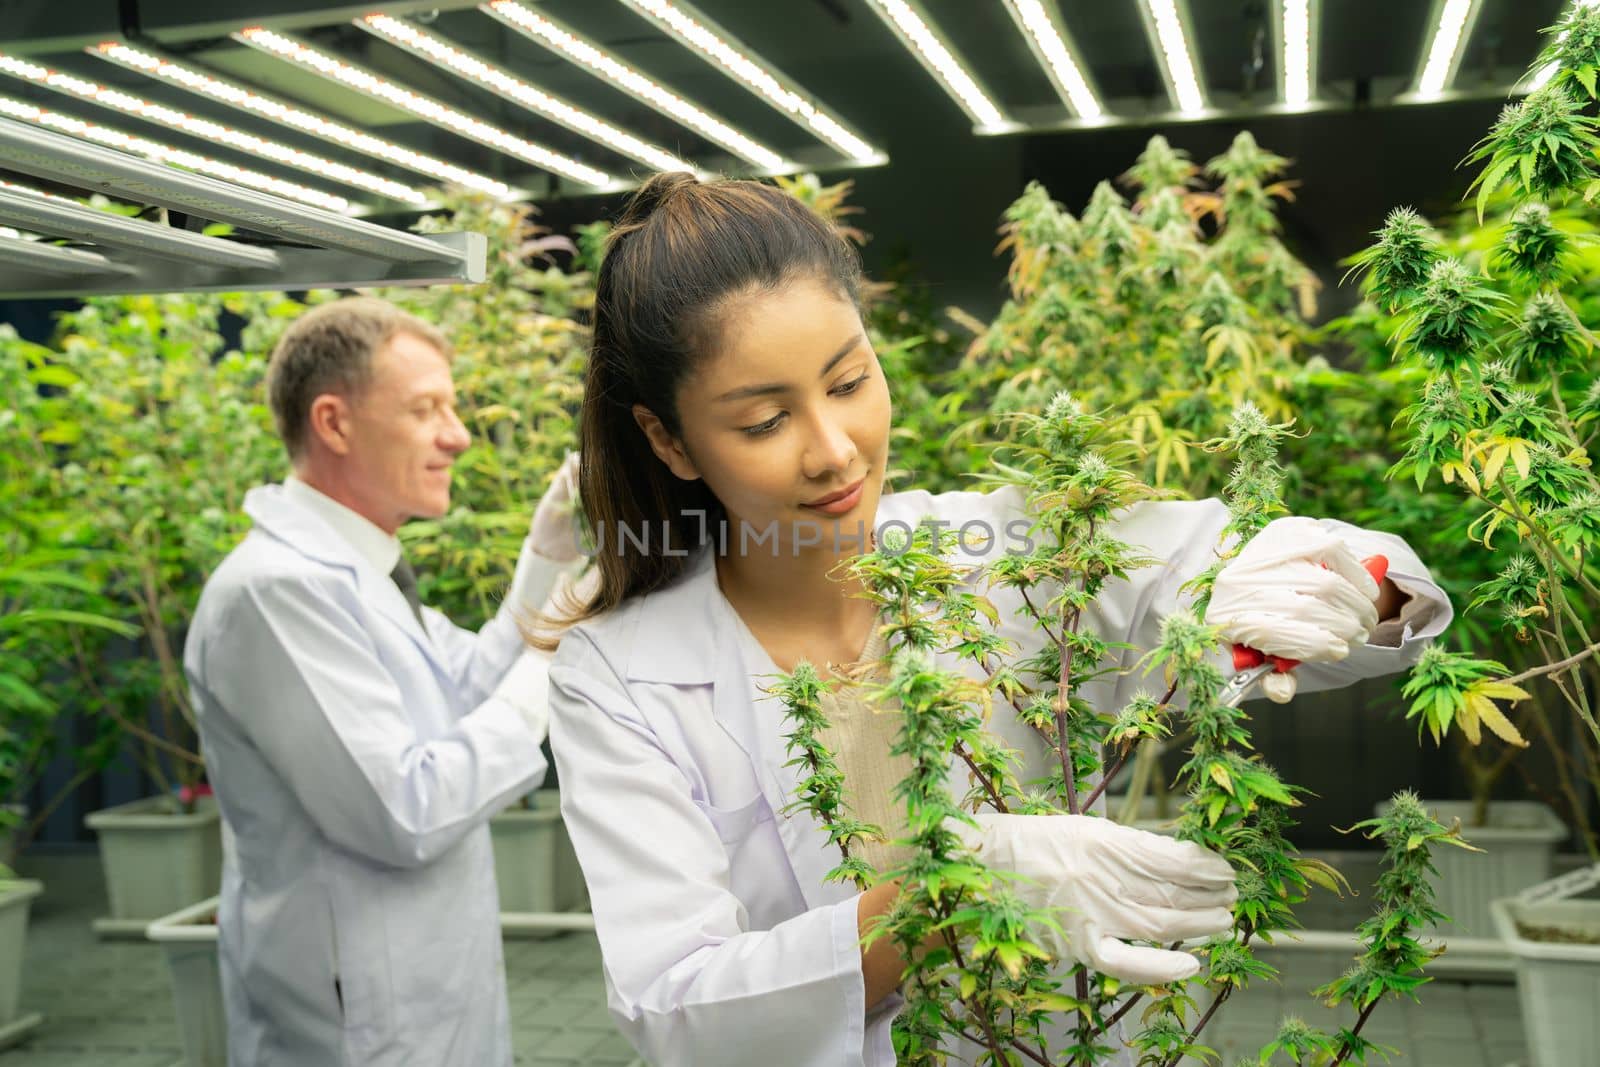 Scientists gather gratifying cannabis plant bud for medical research and production in a curative indoor hydro farm with secateurs. Cannabis farm in grow facility concept for medical purposes.